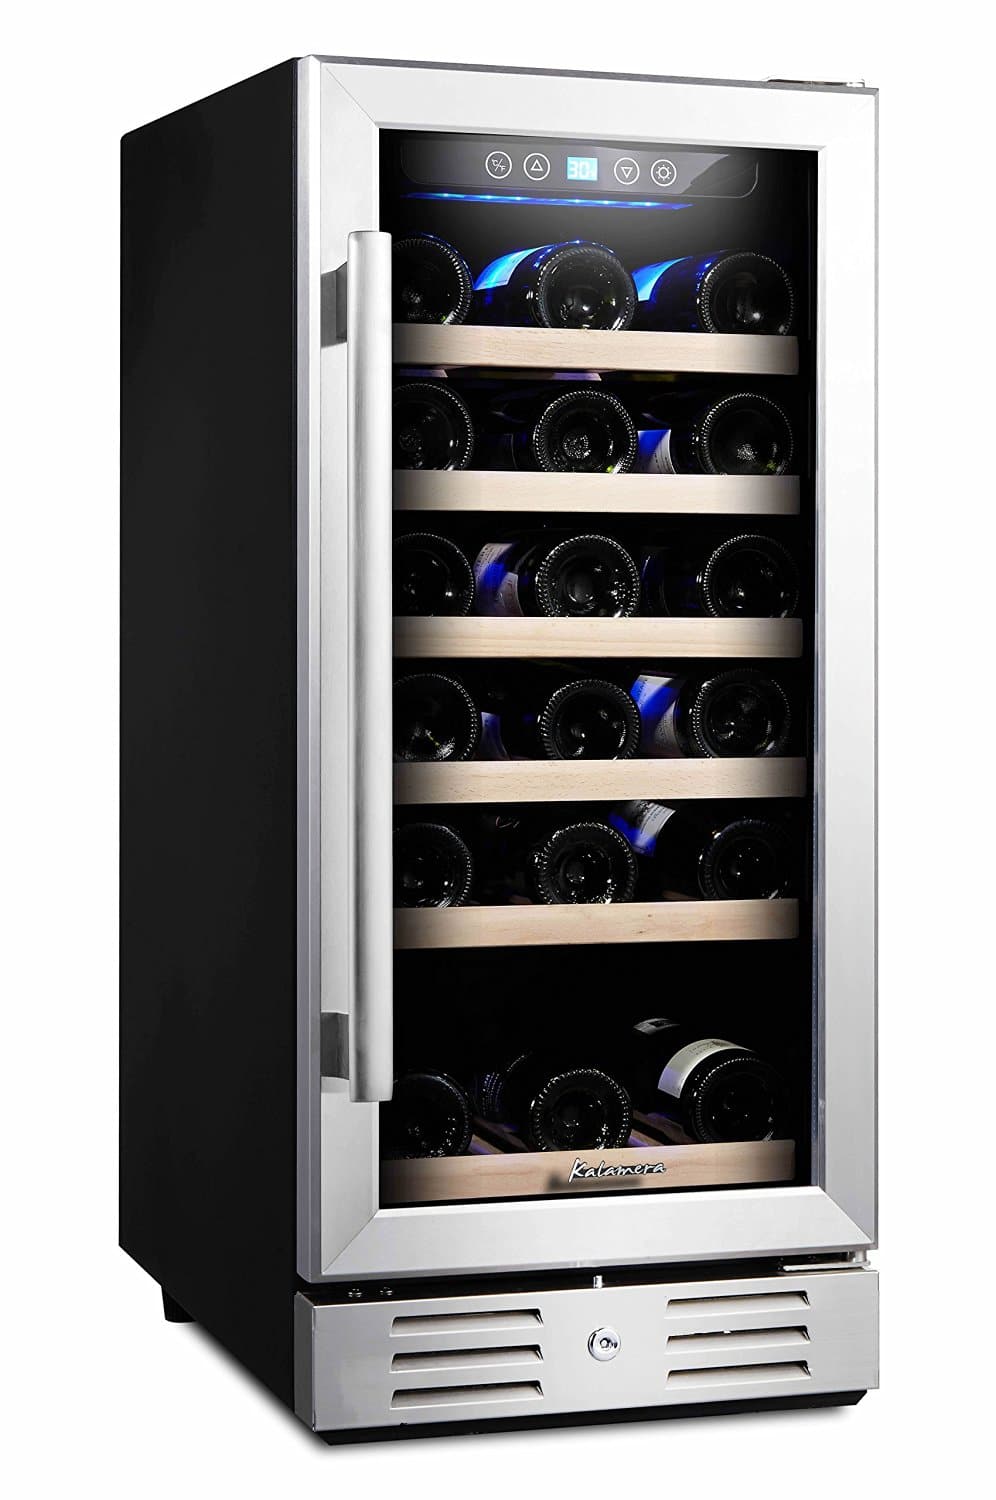 Top 3 Best Wine Coolers 2020 Review